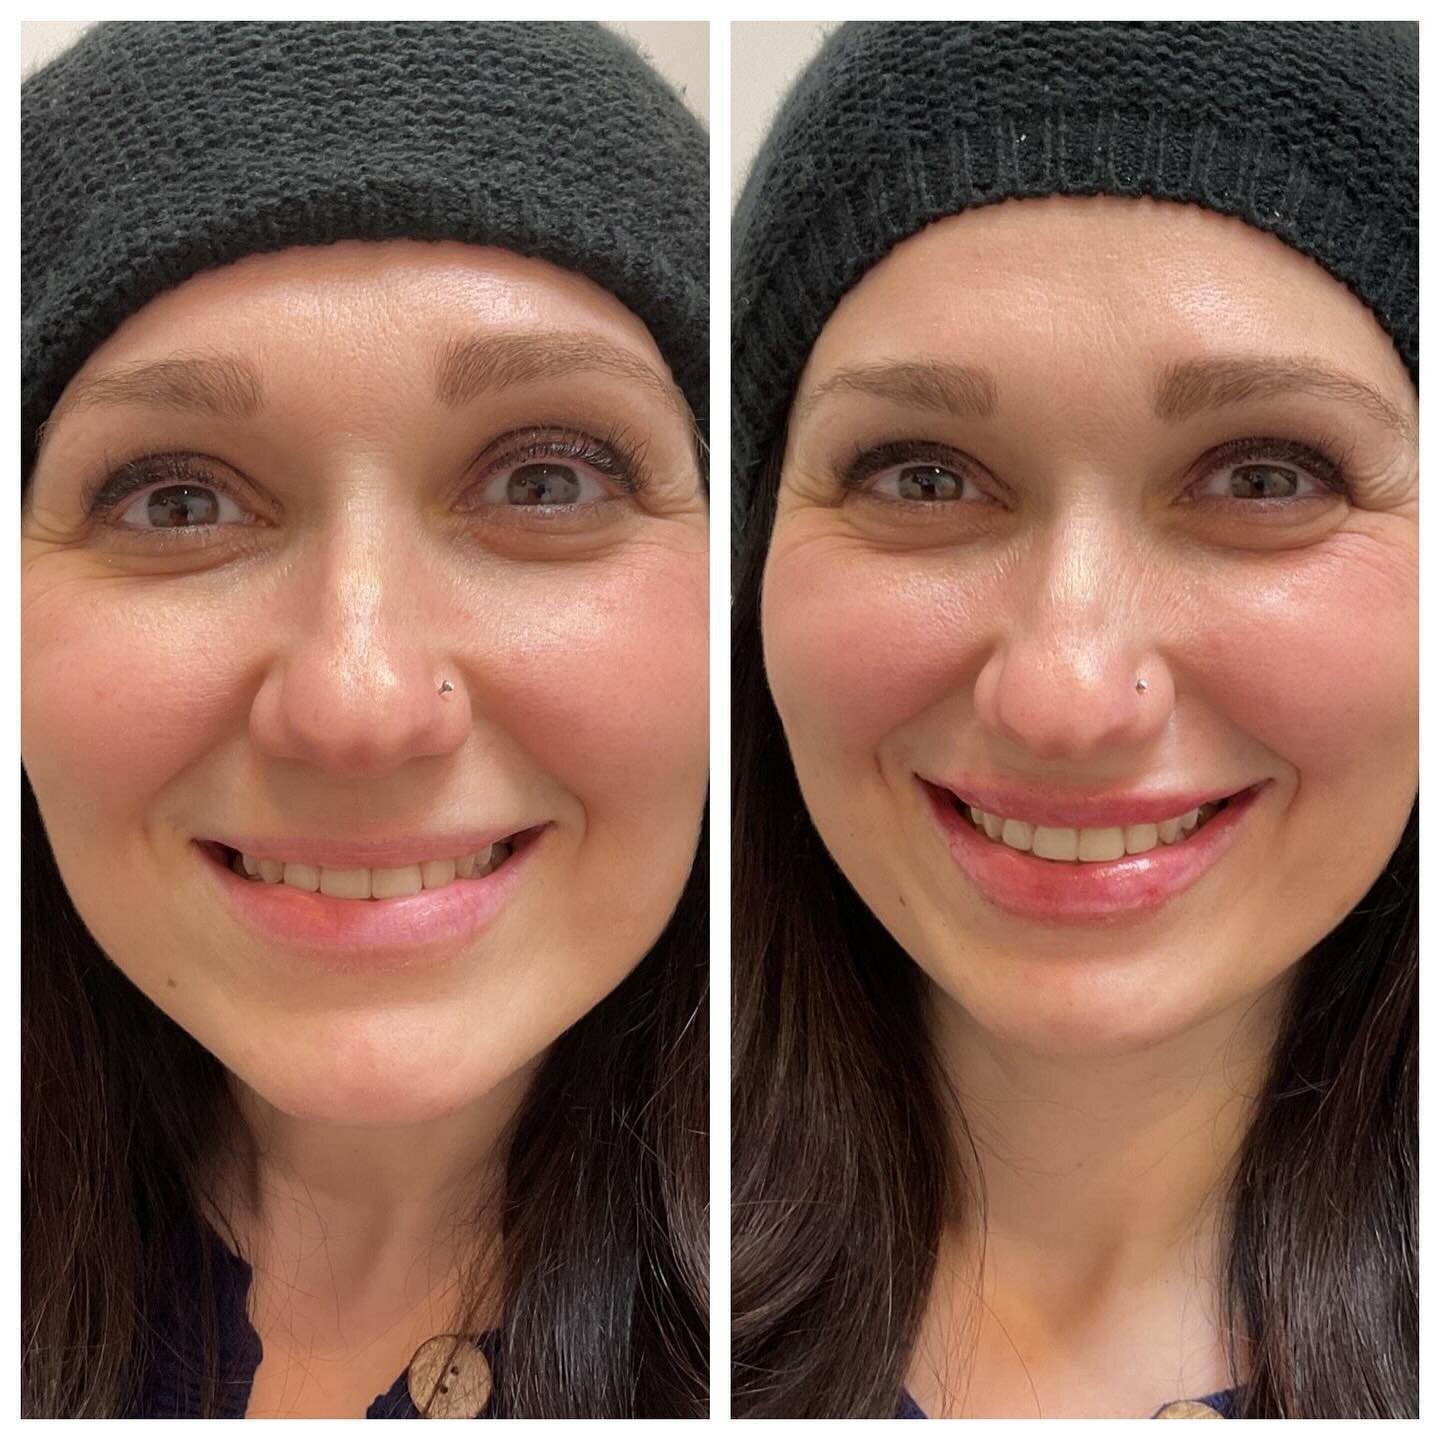 Nothing makes us happier than that smile and excitement ☺️ 
Accentuating her natural shape and beautiful lips, providing more definition, projection and volume in a natural looking way! 😍😍
 #restalynekysse #lipfiller #beauty #facialbalancing